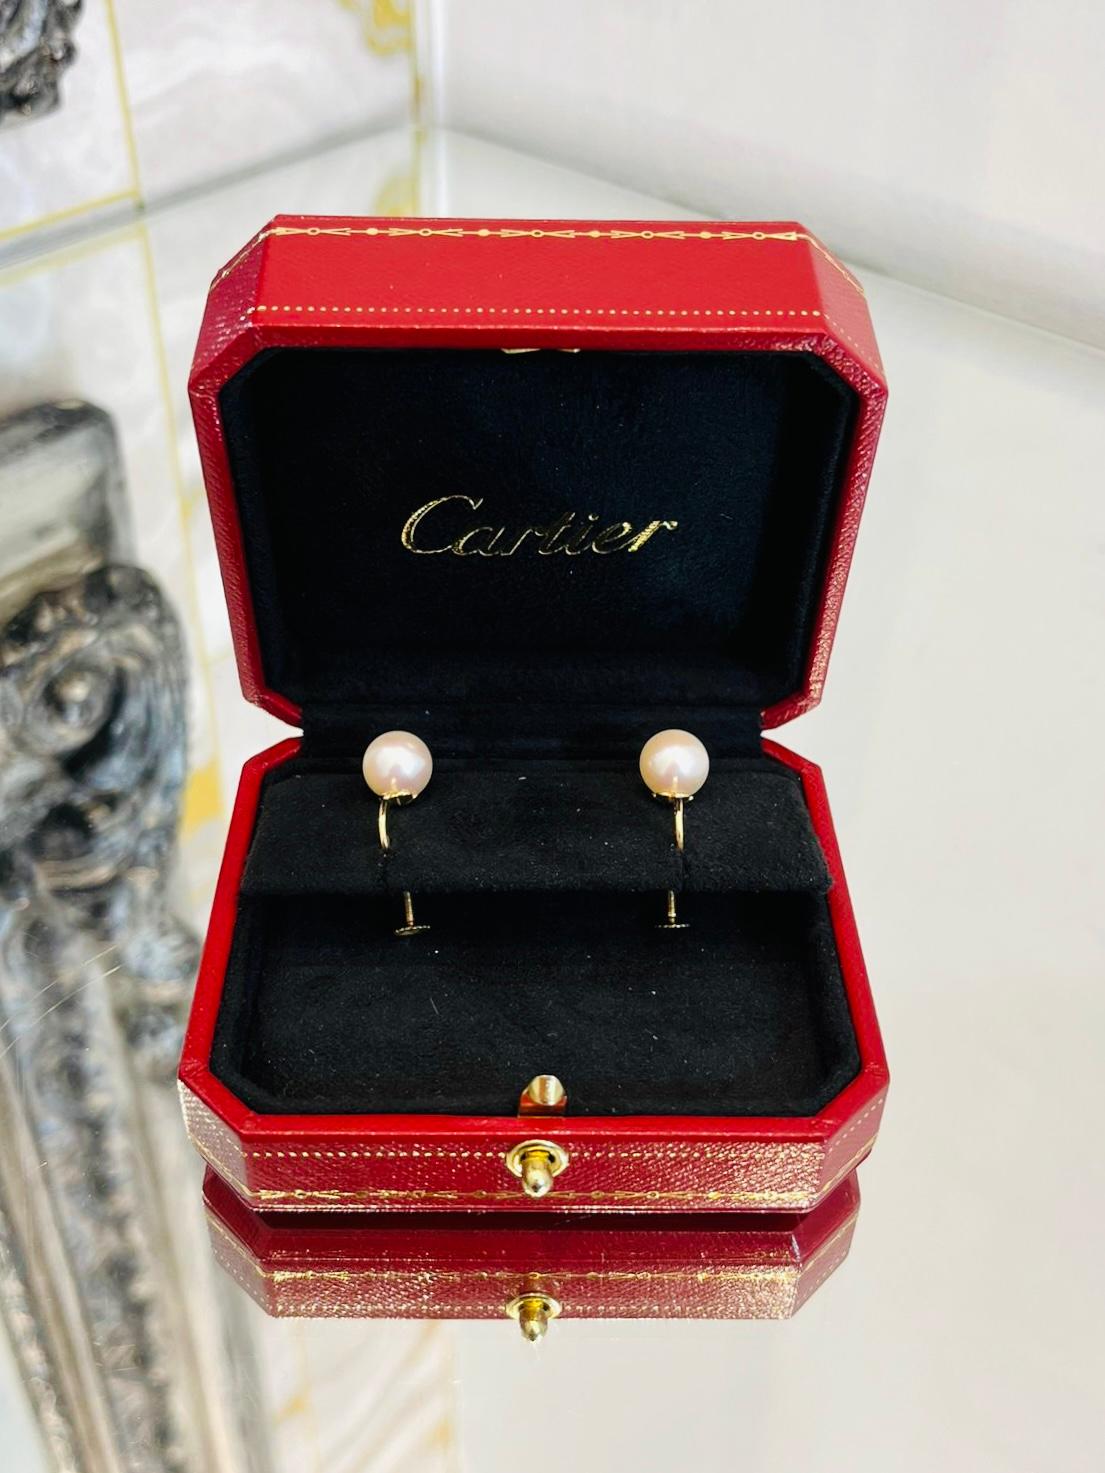 Cartier Akoya Pearl & 18k Gold Earrings

Rare Akoya pearl earrings with gold showing to the front, when wearing 

and screw back closure. For pierced ears.

Size - 9.5mm Akoya Pearl

Condition - Vintage - Very Good

Composition - Akoya Pearl, 18k